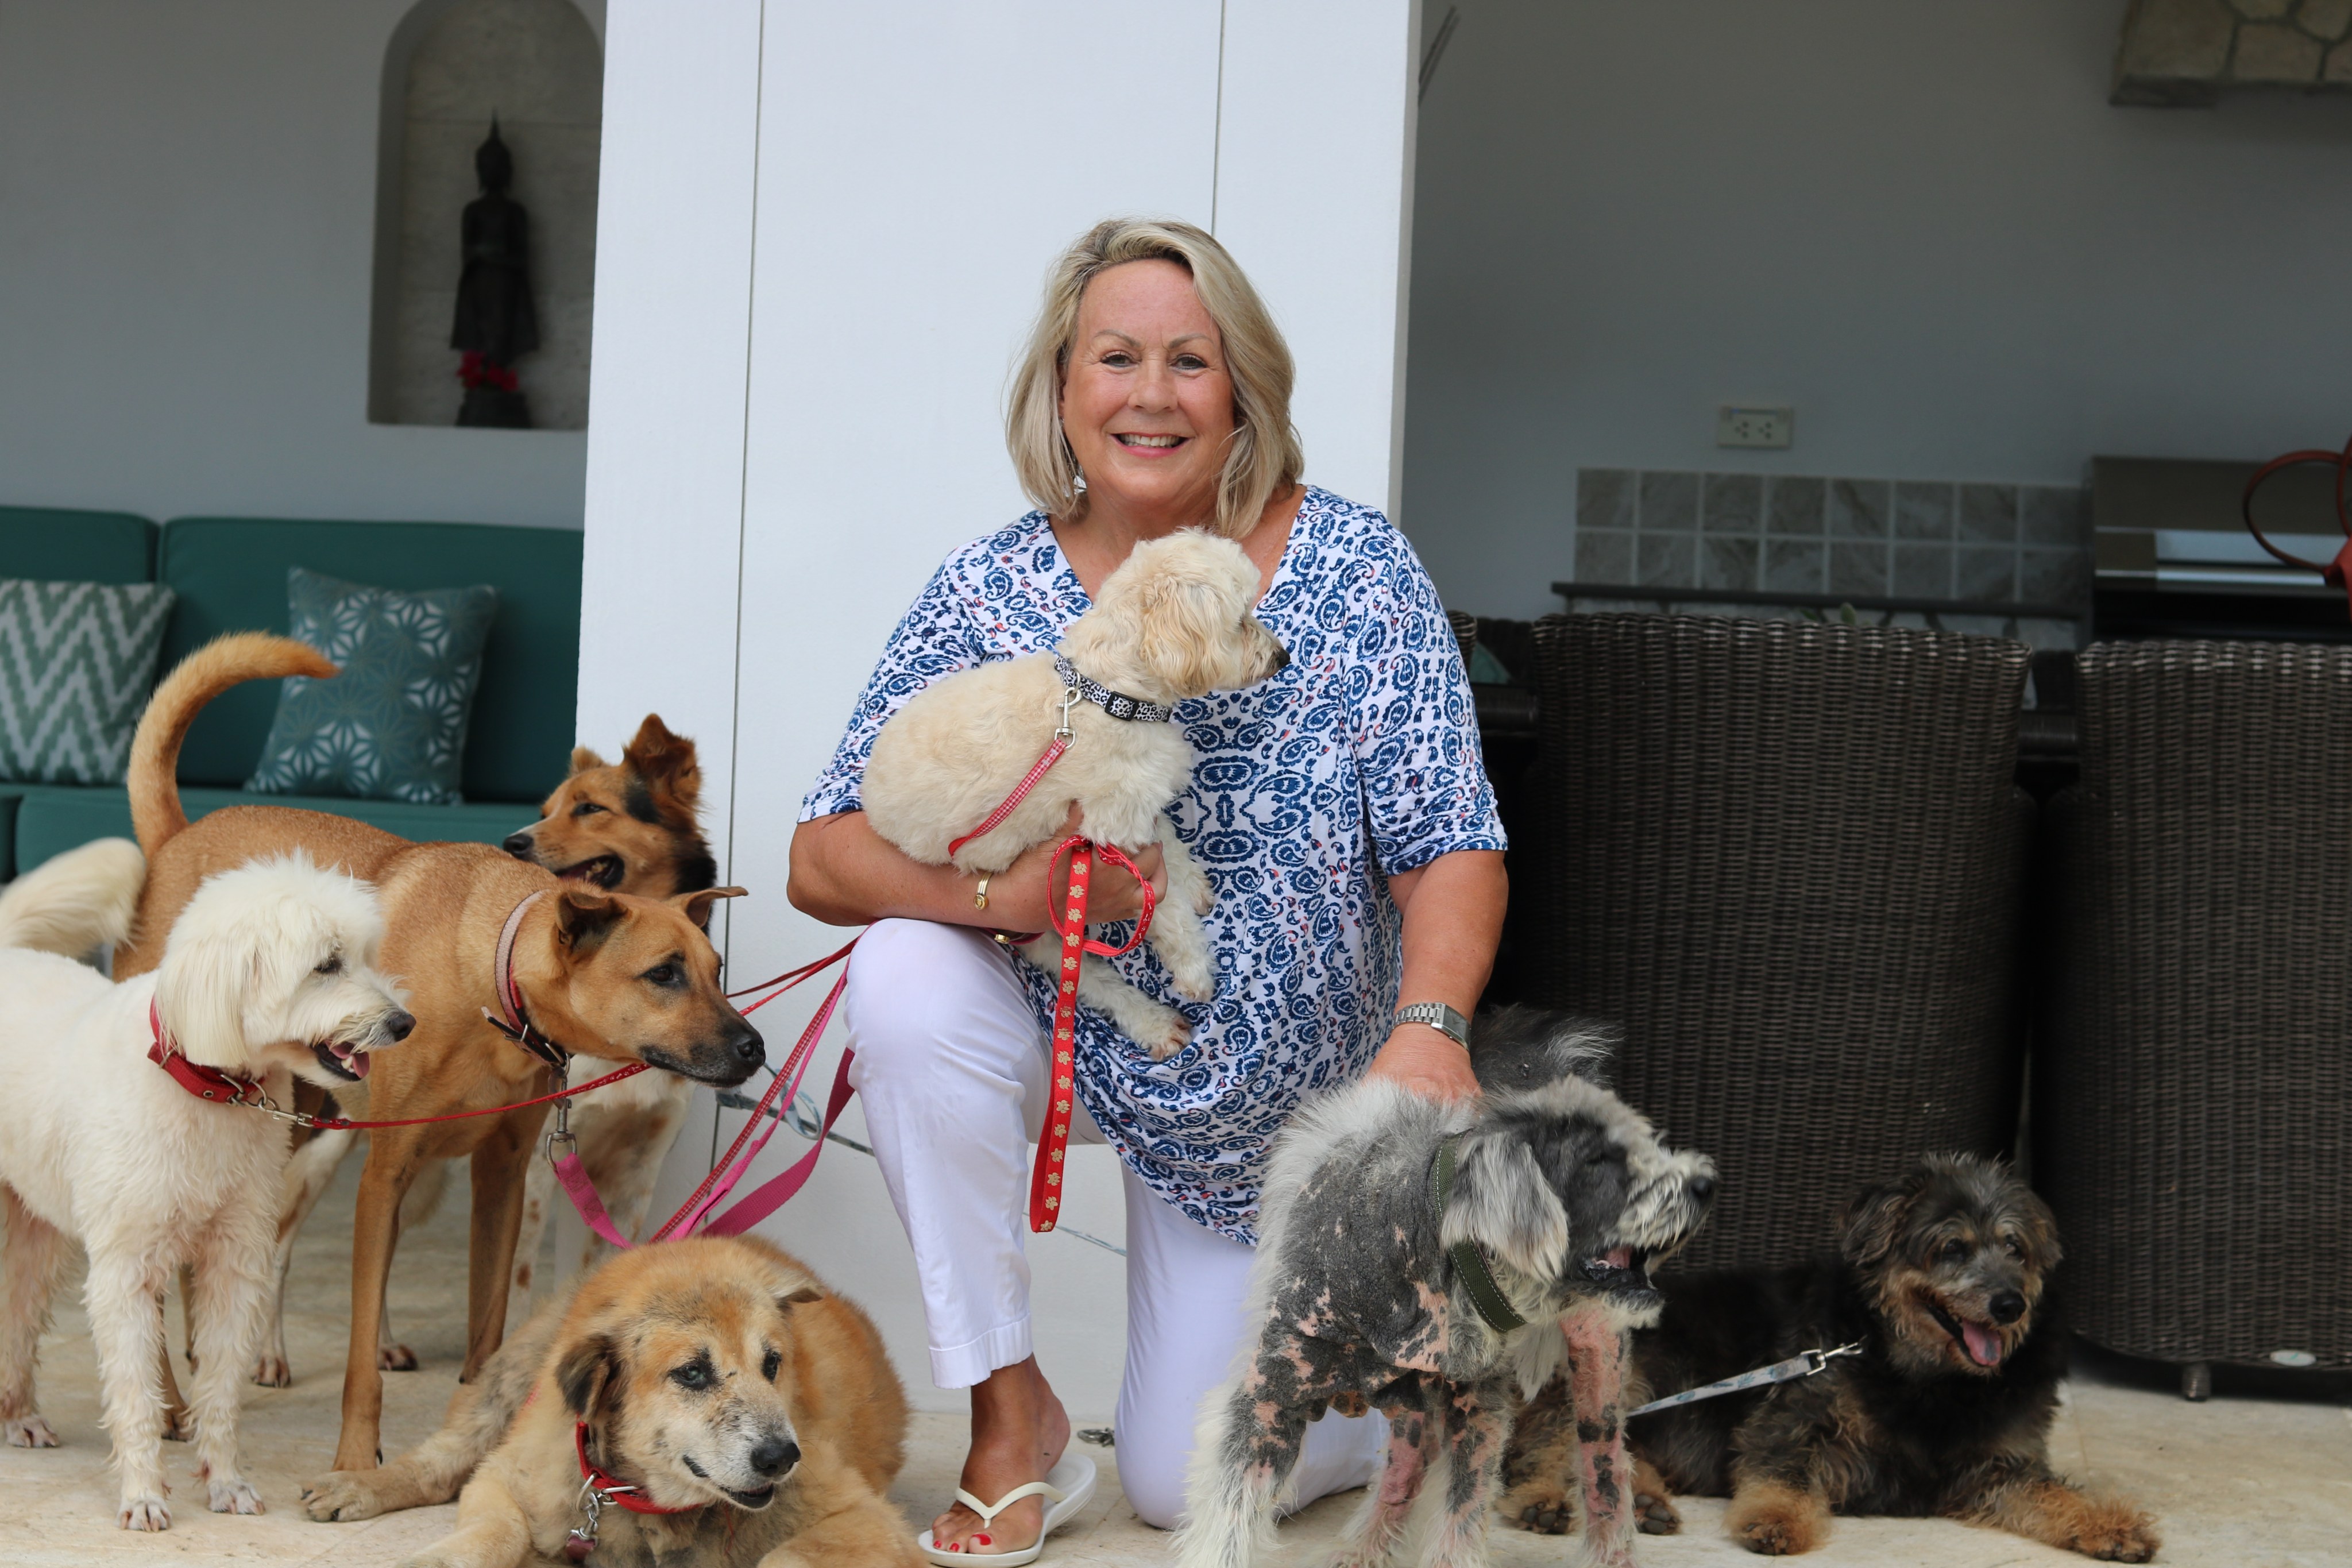 Susan Field is an ex-Hong Kong resident who ran the PR company ImpactAsia. She now lives in Thailand, with eight rescue dogs. Photo: Thomas Bird